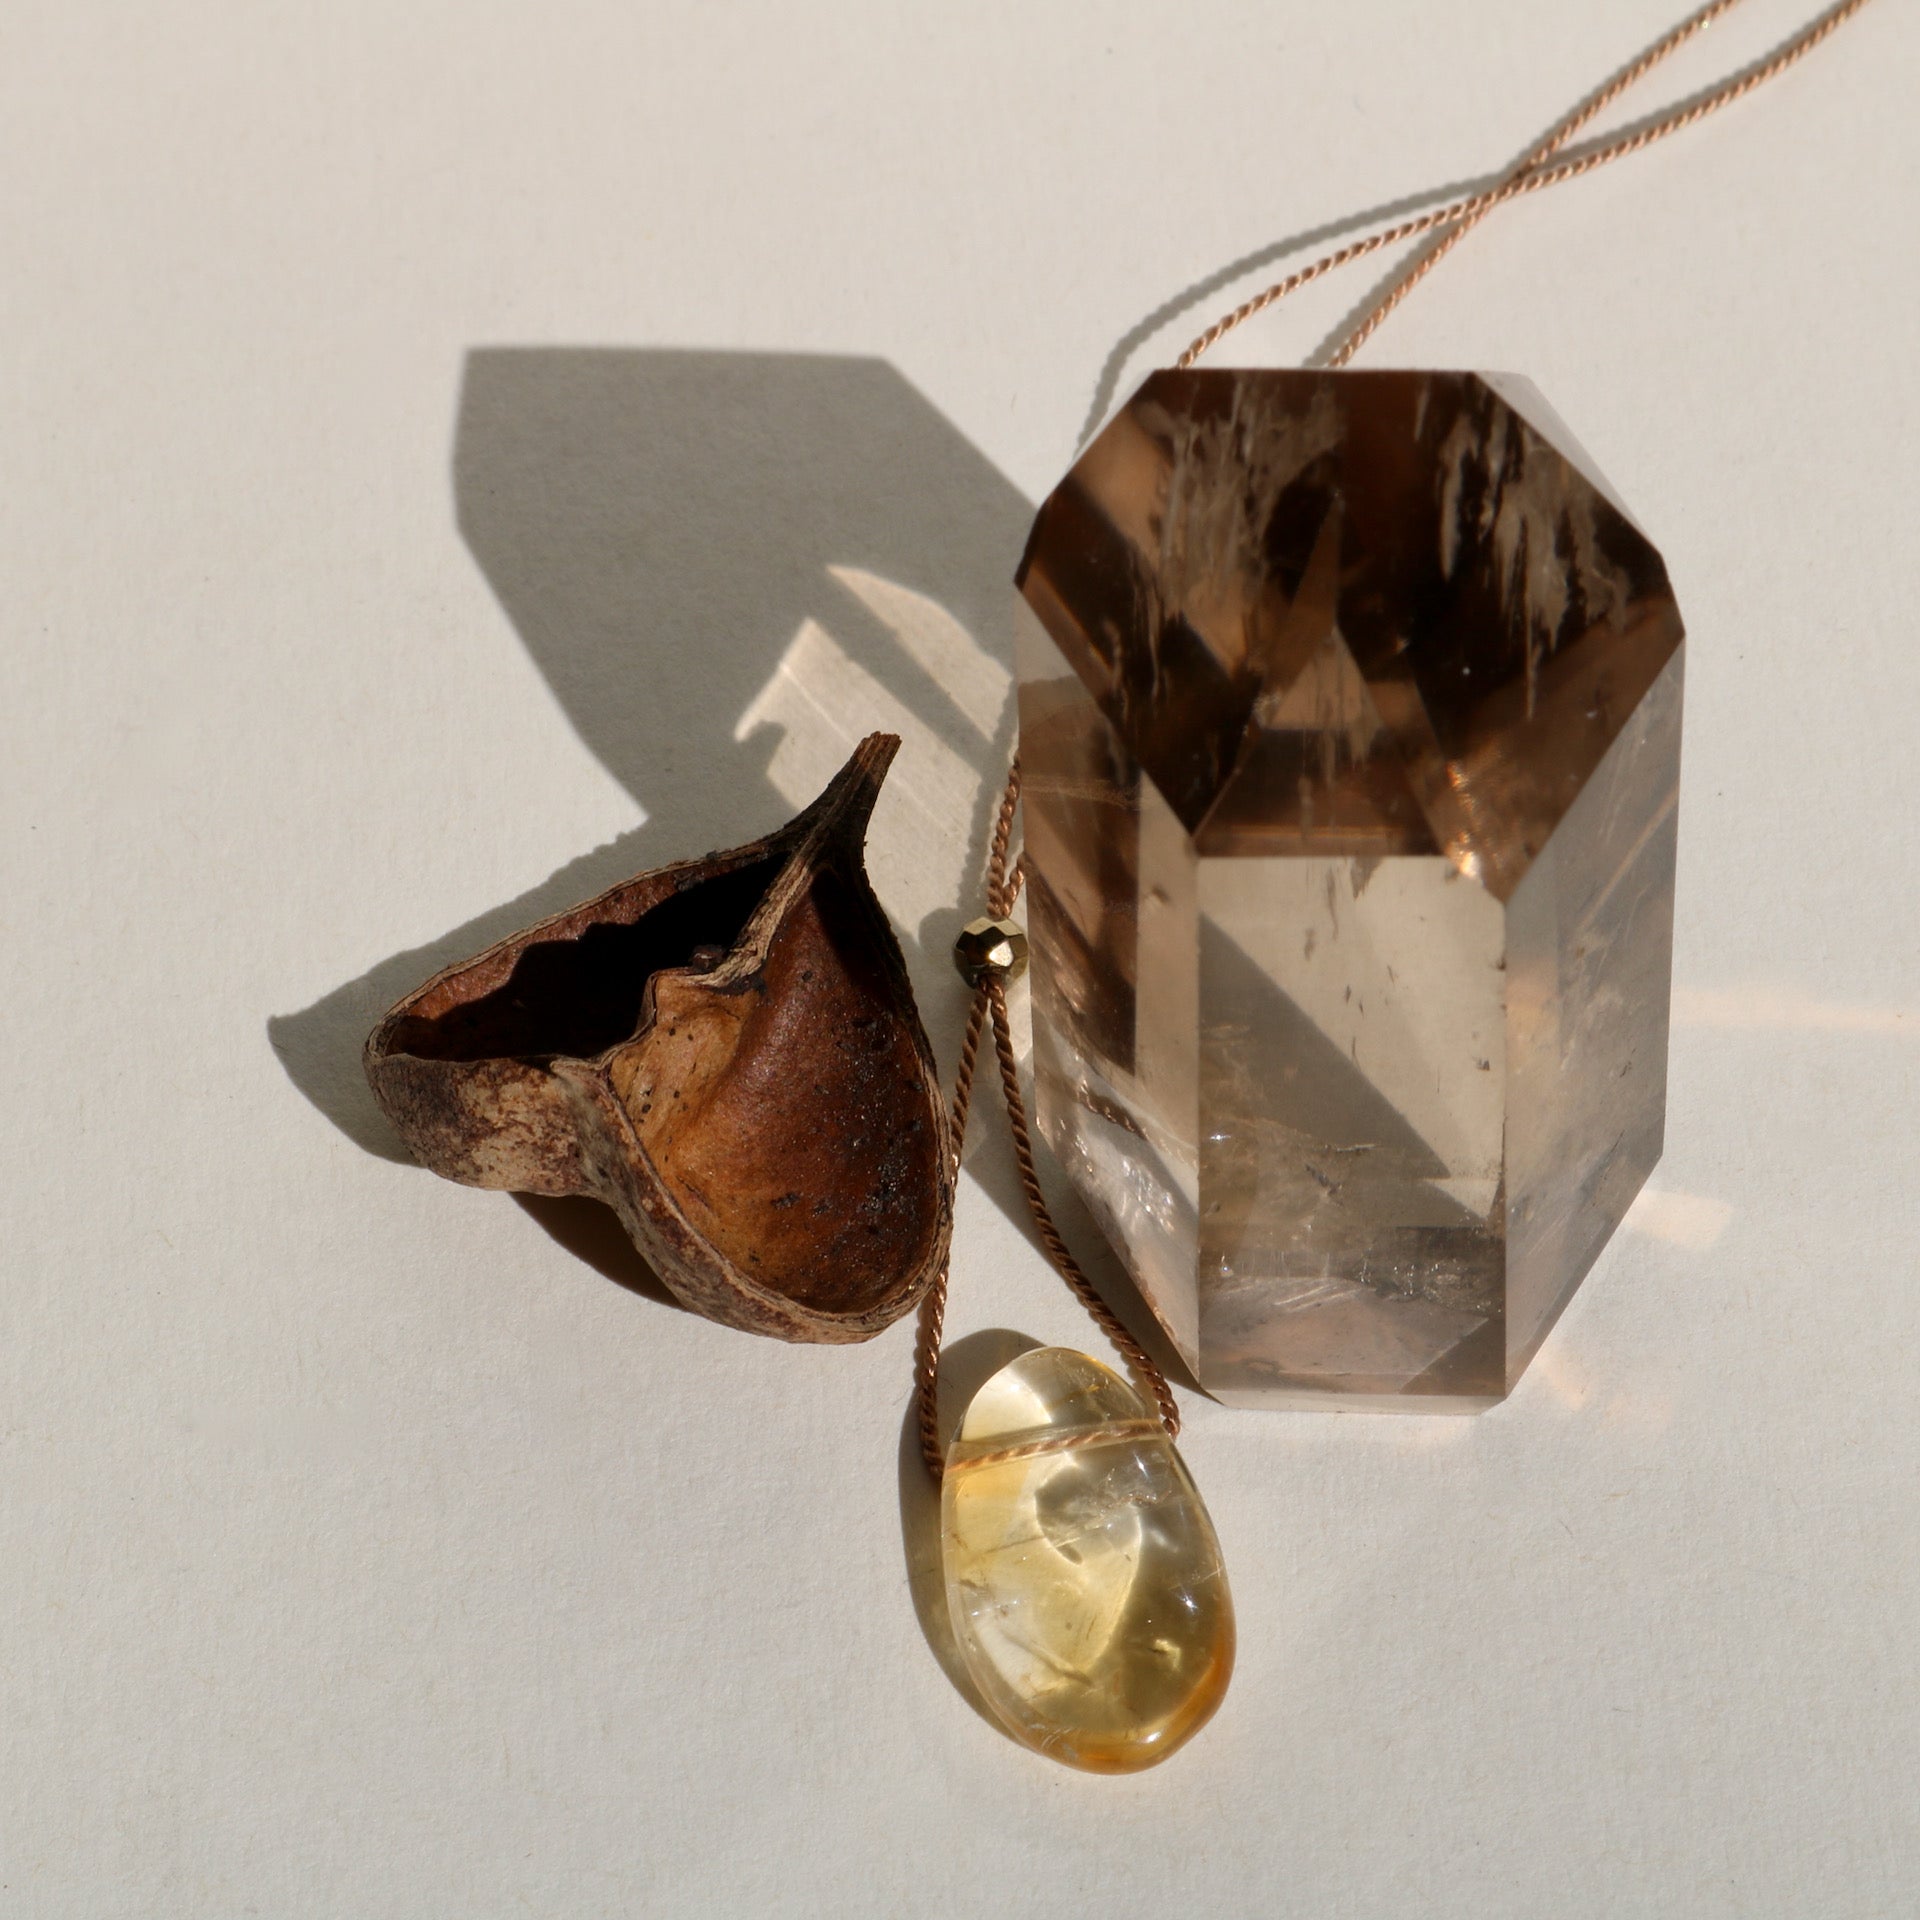 Smooth Citrine pebble-like stone on silk necklace displayed with smoky quartz pillar and seed pod in the sunshine on neutral cream colored background